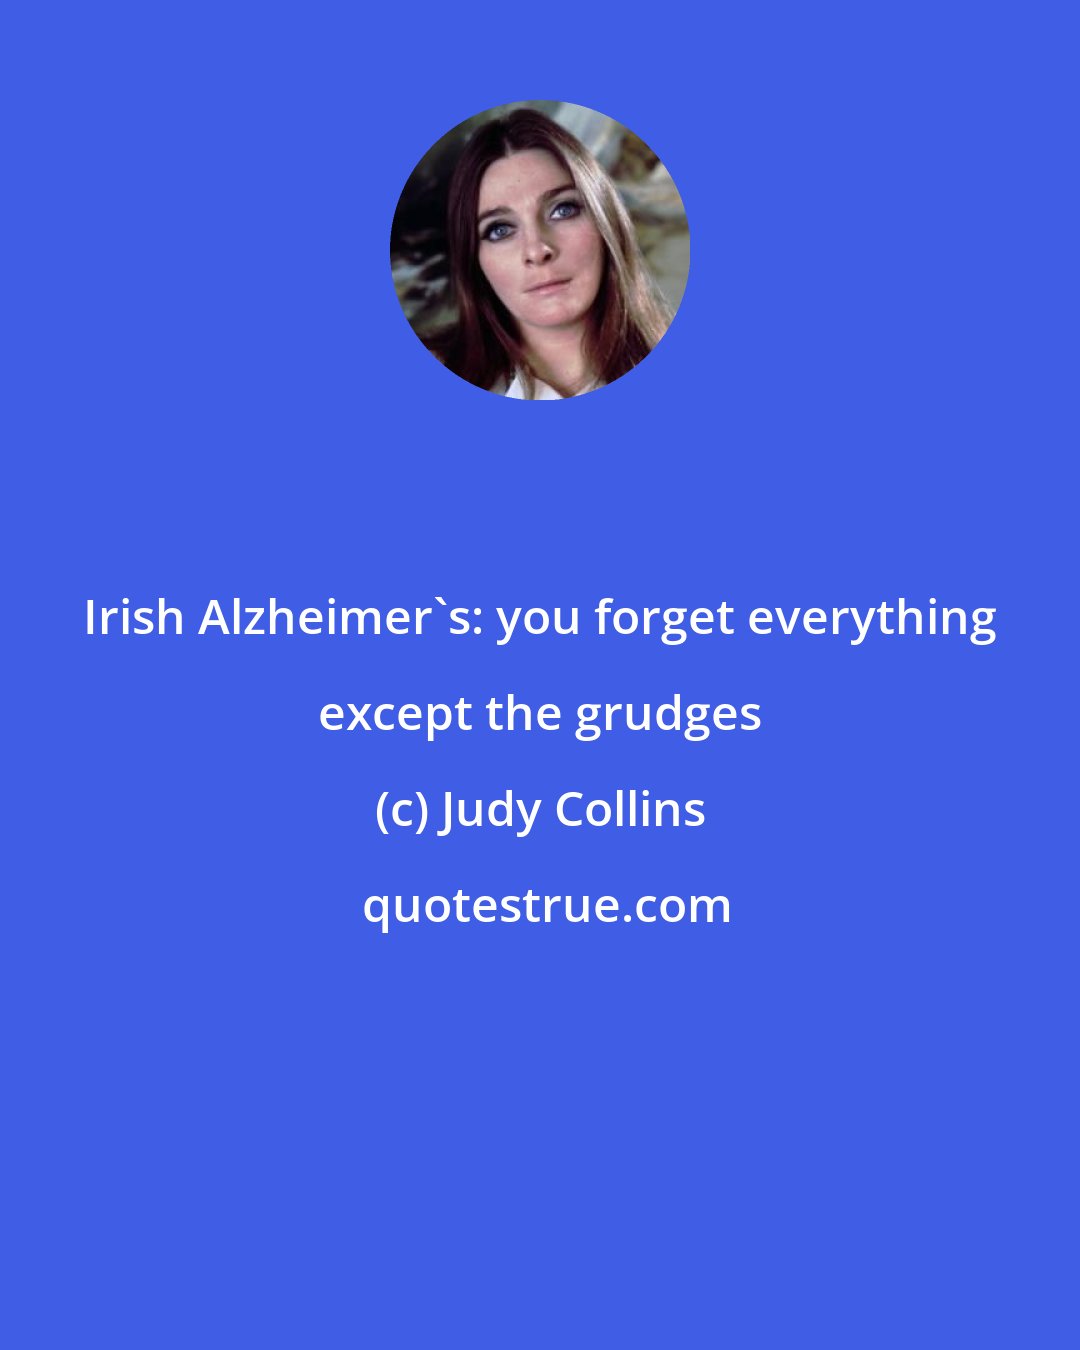 Judy Collins: Irish Alzheimer's: you forget everything except the grudges